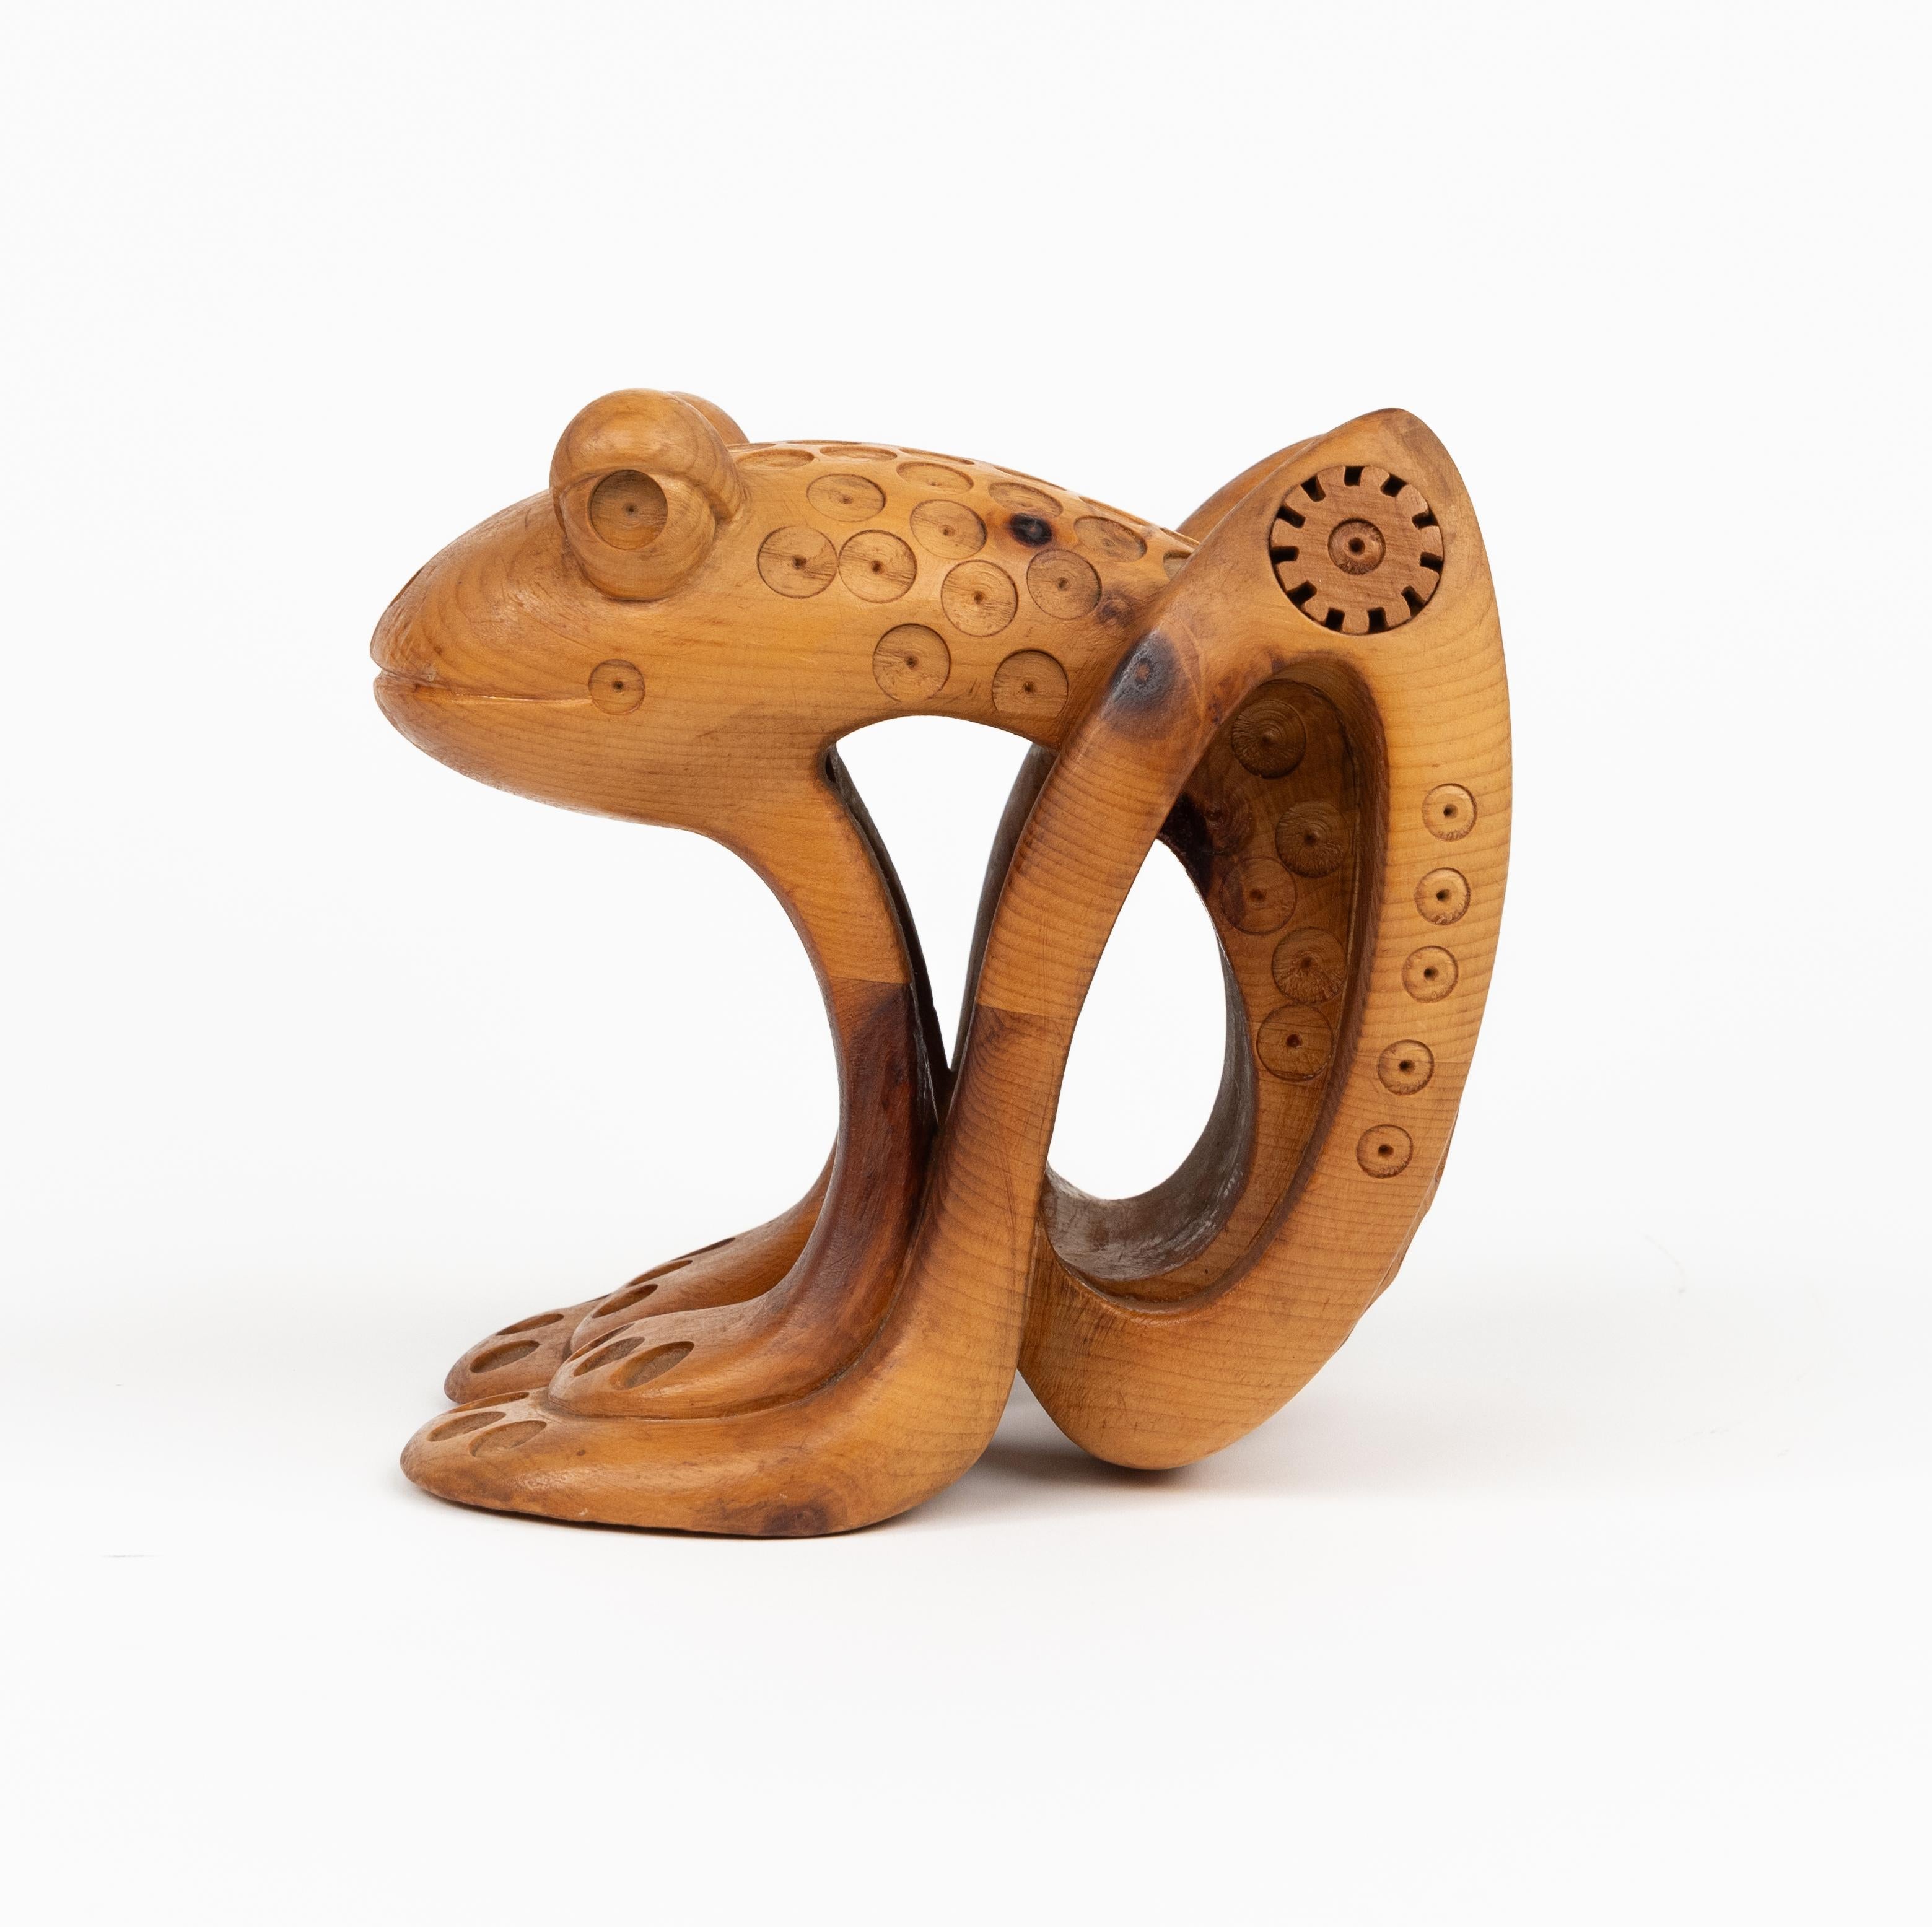 Pine Wood Decorative Sculpture Shape Frog by Ferdinando Codognotto, Italy 2001 For Sale 1